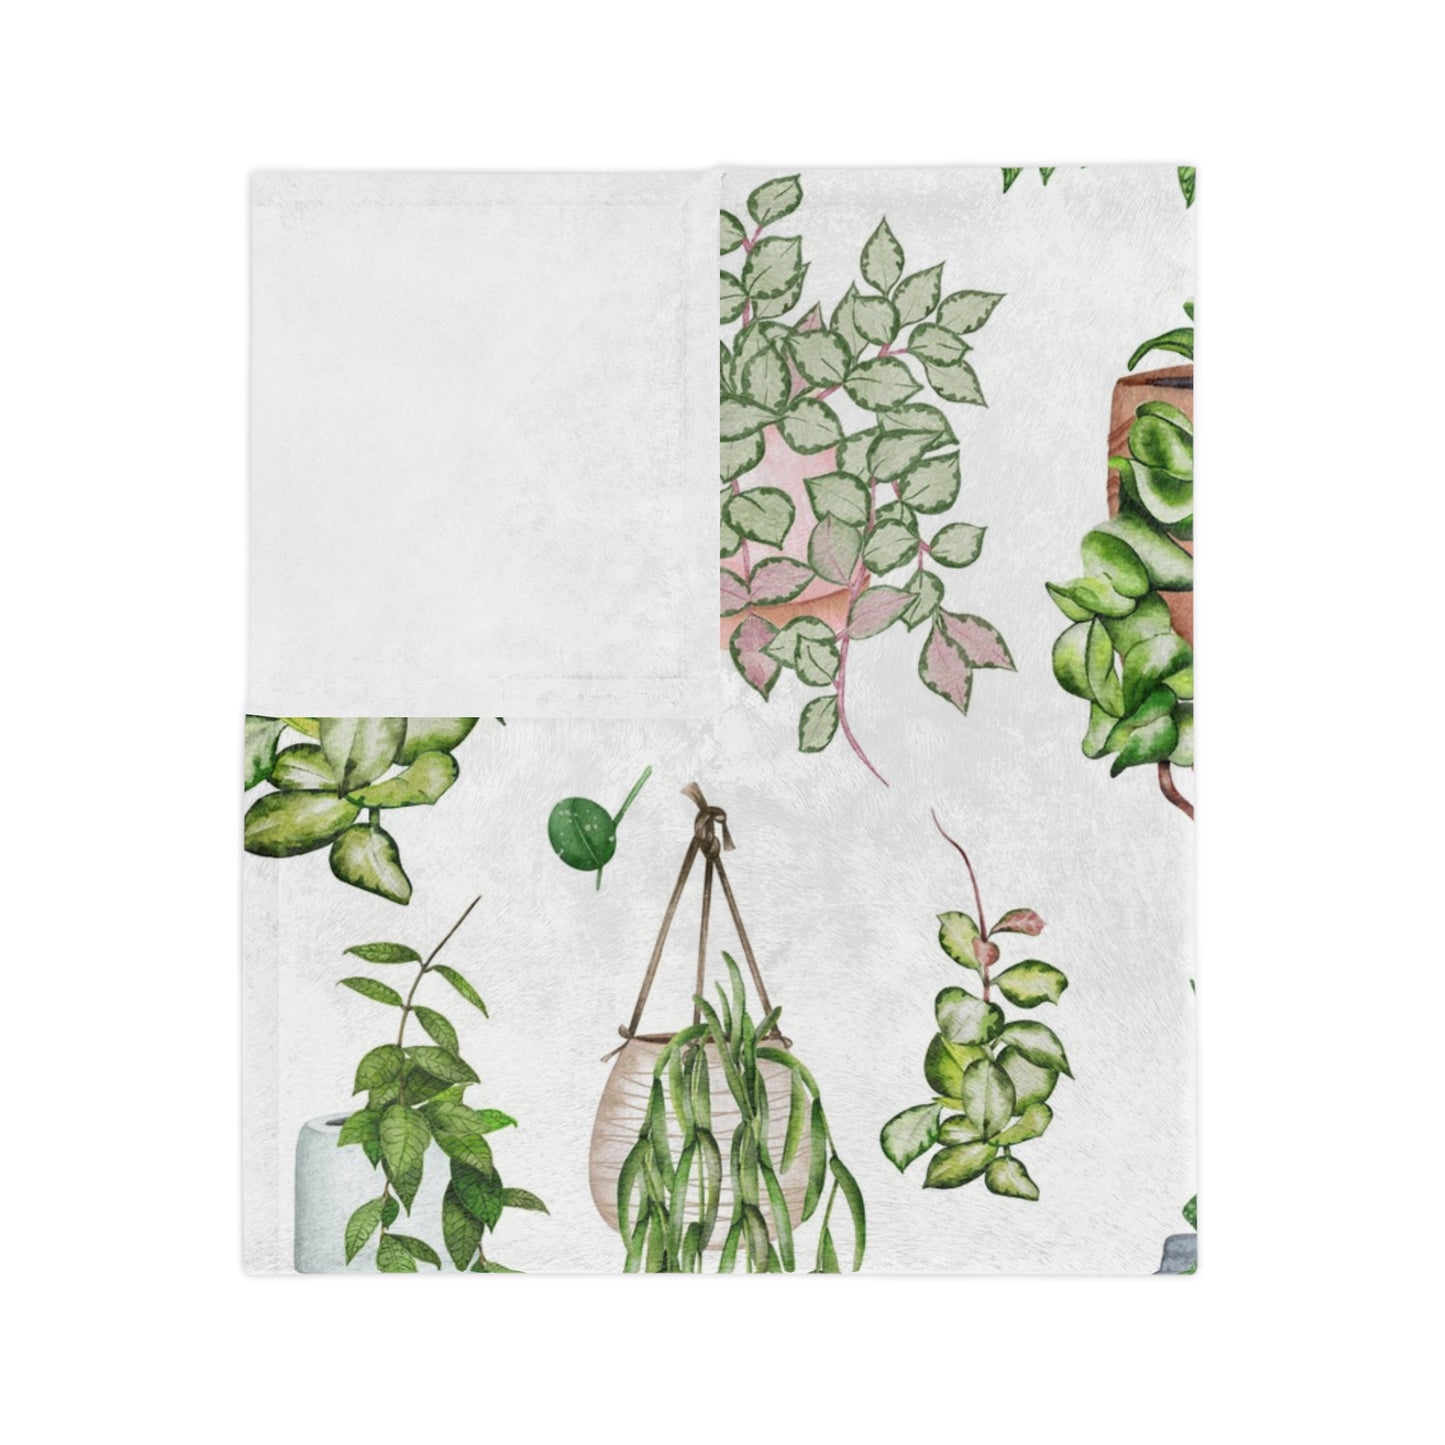 Hoya plant with pots Velveteen Minky Blanket for plant lady, plant mom or plant lover. House plants themed Christmas gift